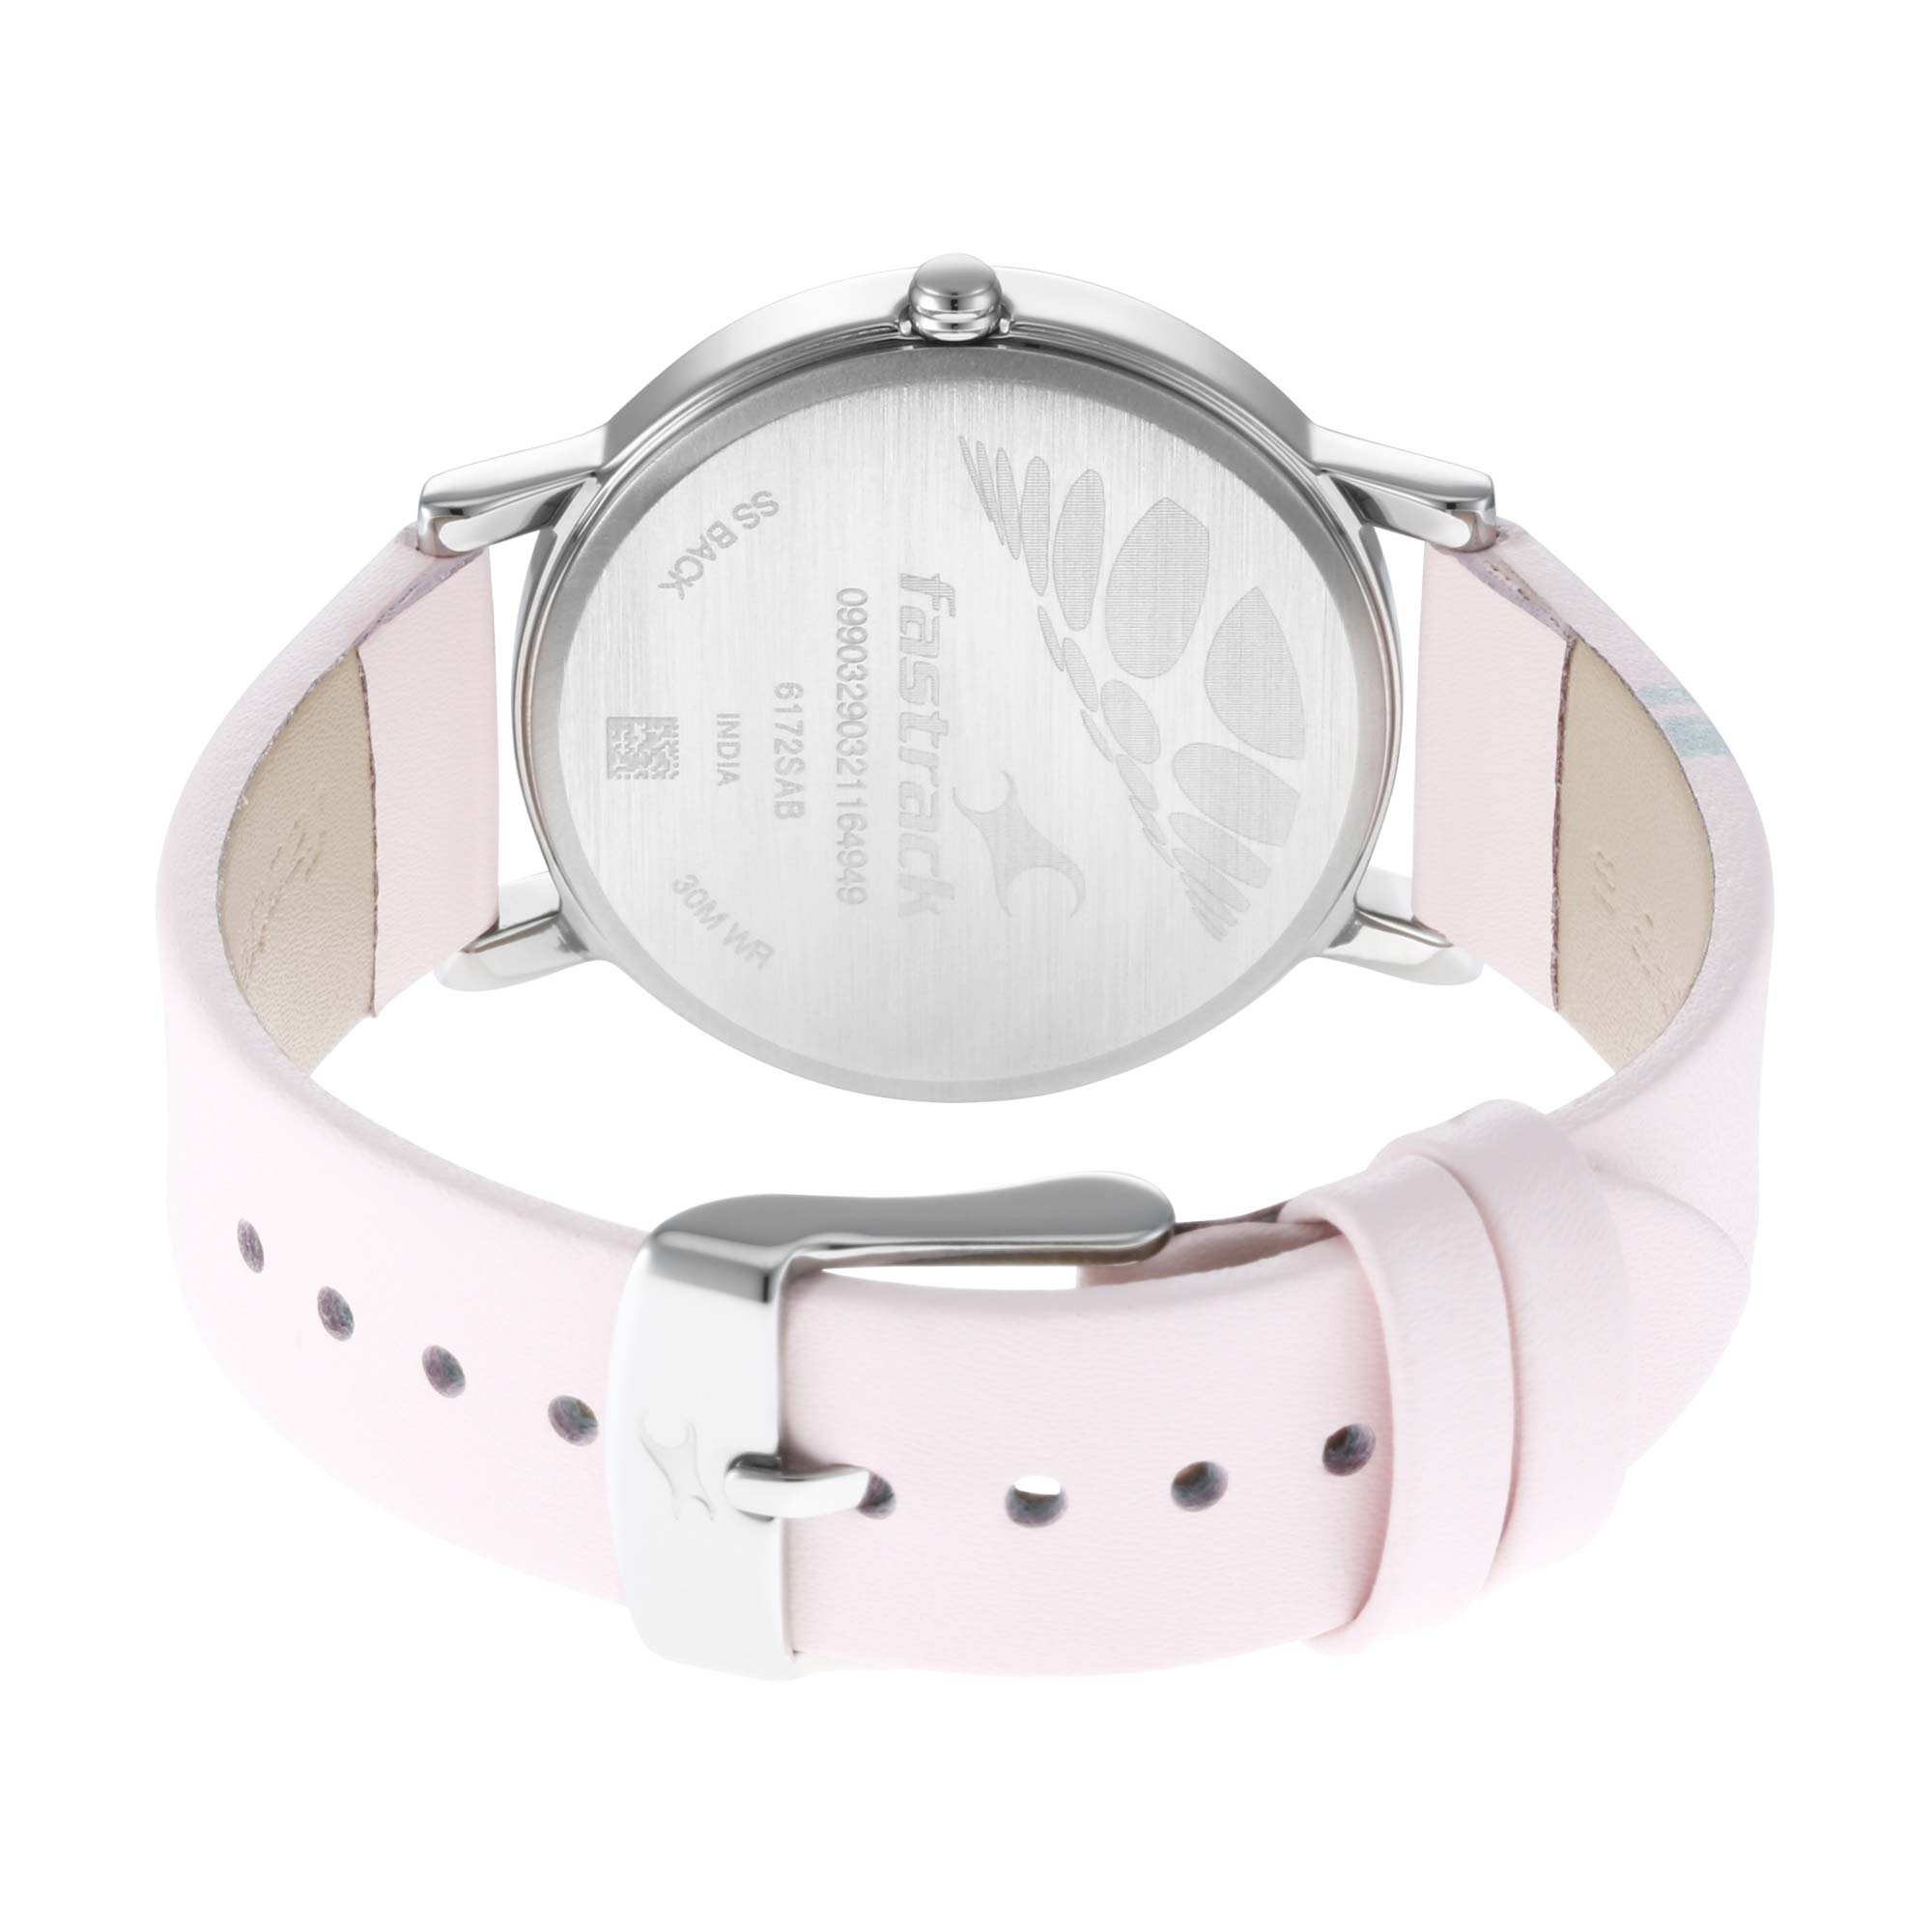 Fastrack Wear Your Look Quartz Analog with Day and Date Pink Dial Leather Strap Watch for Girls